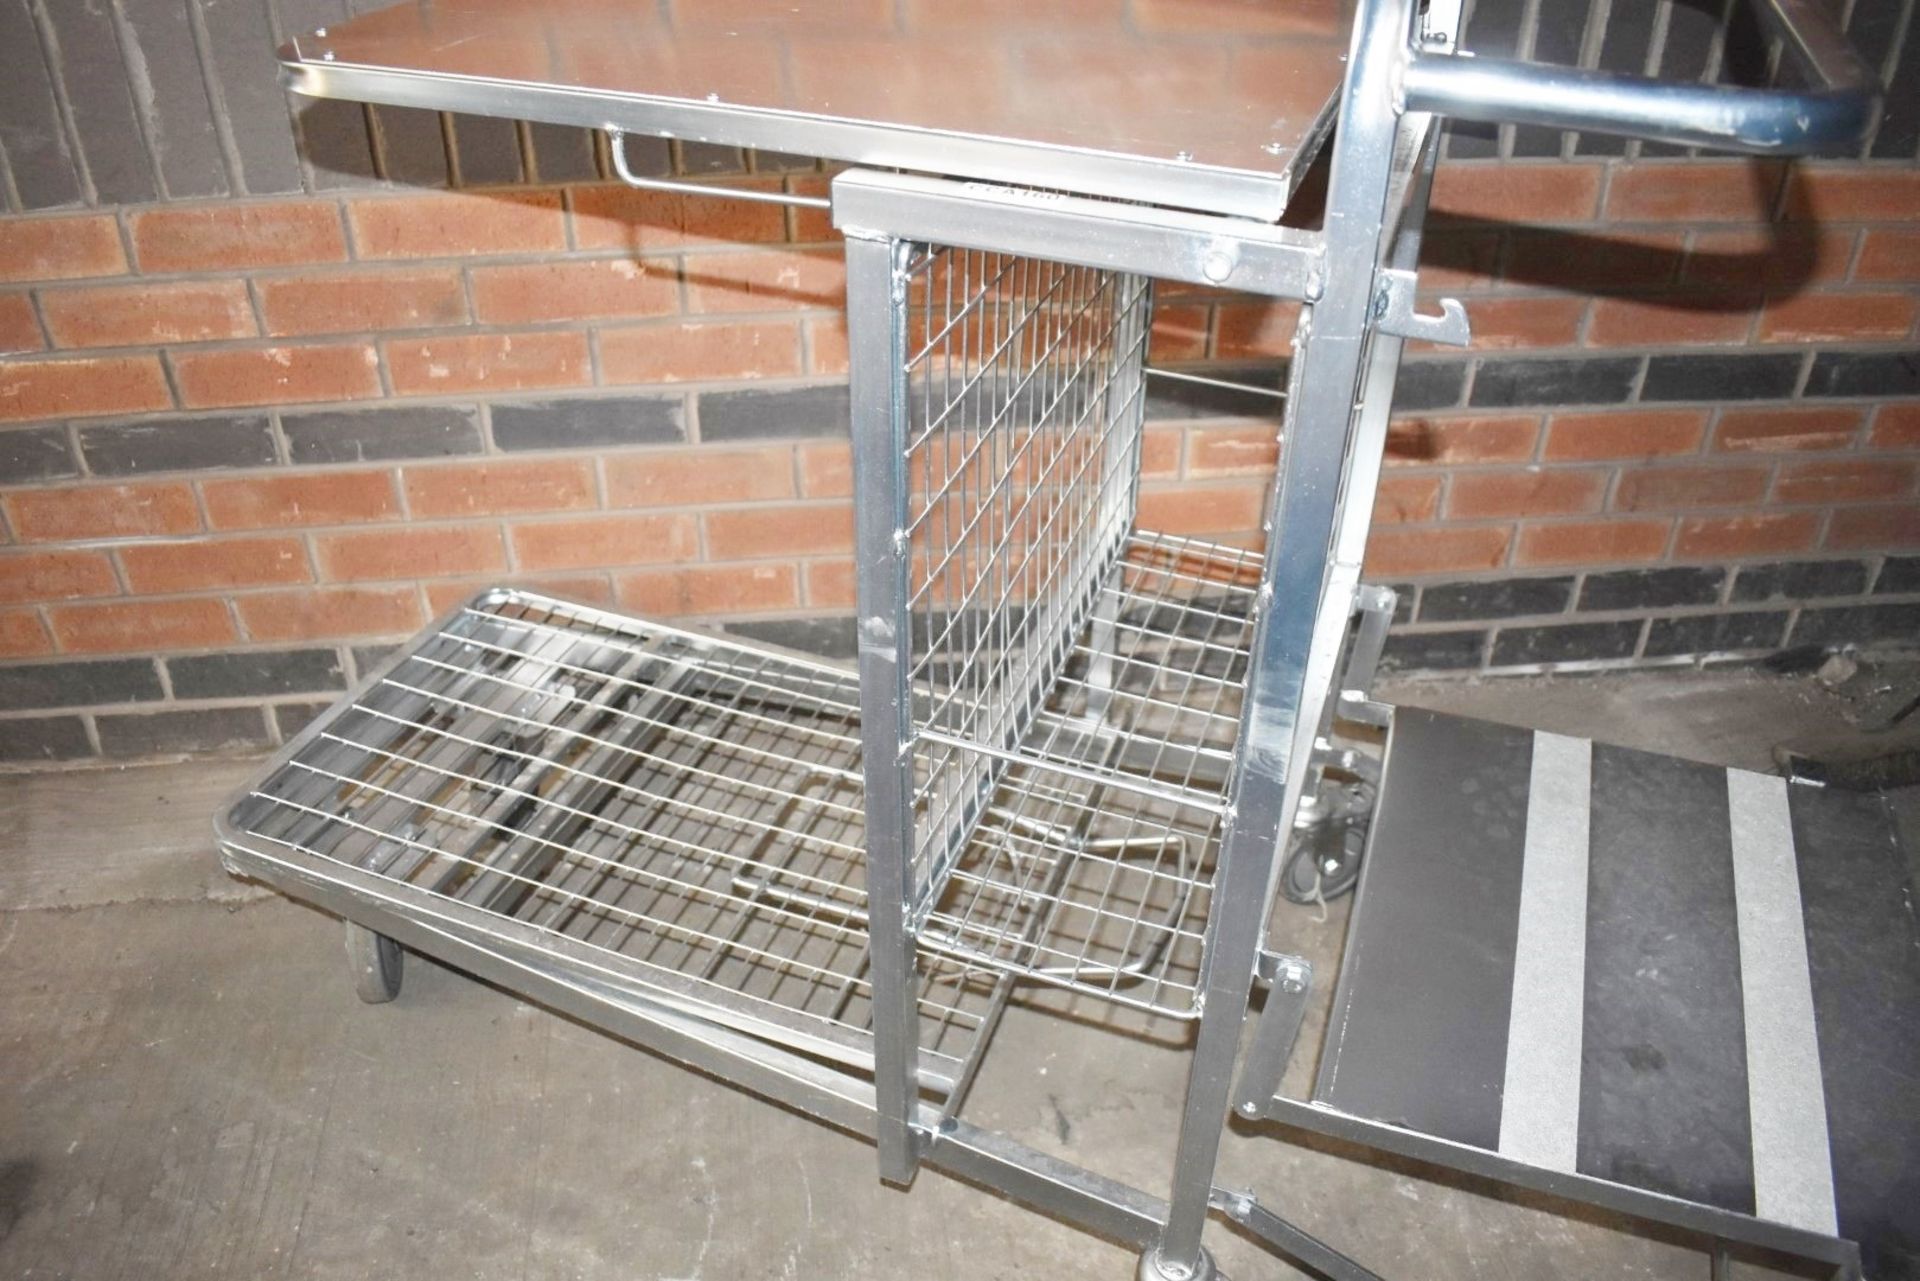 1 x Supermarket Retail Merchandising Trolley With Pull Out Step and Folding Shelf - Dimensions: - Image 5 of 9